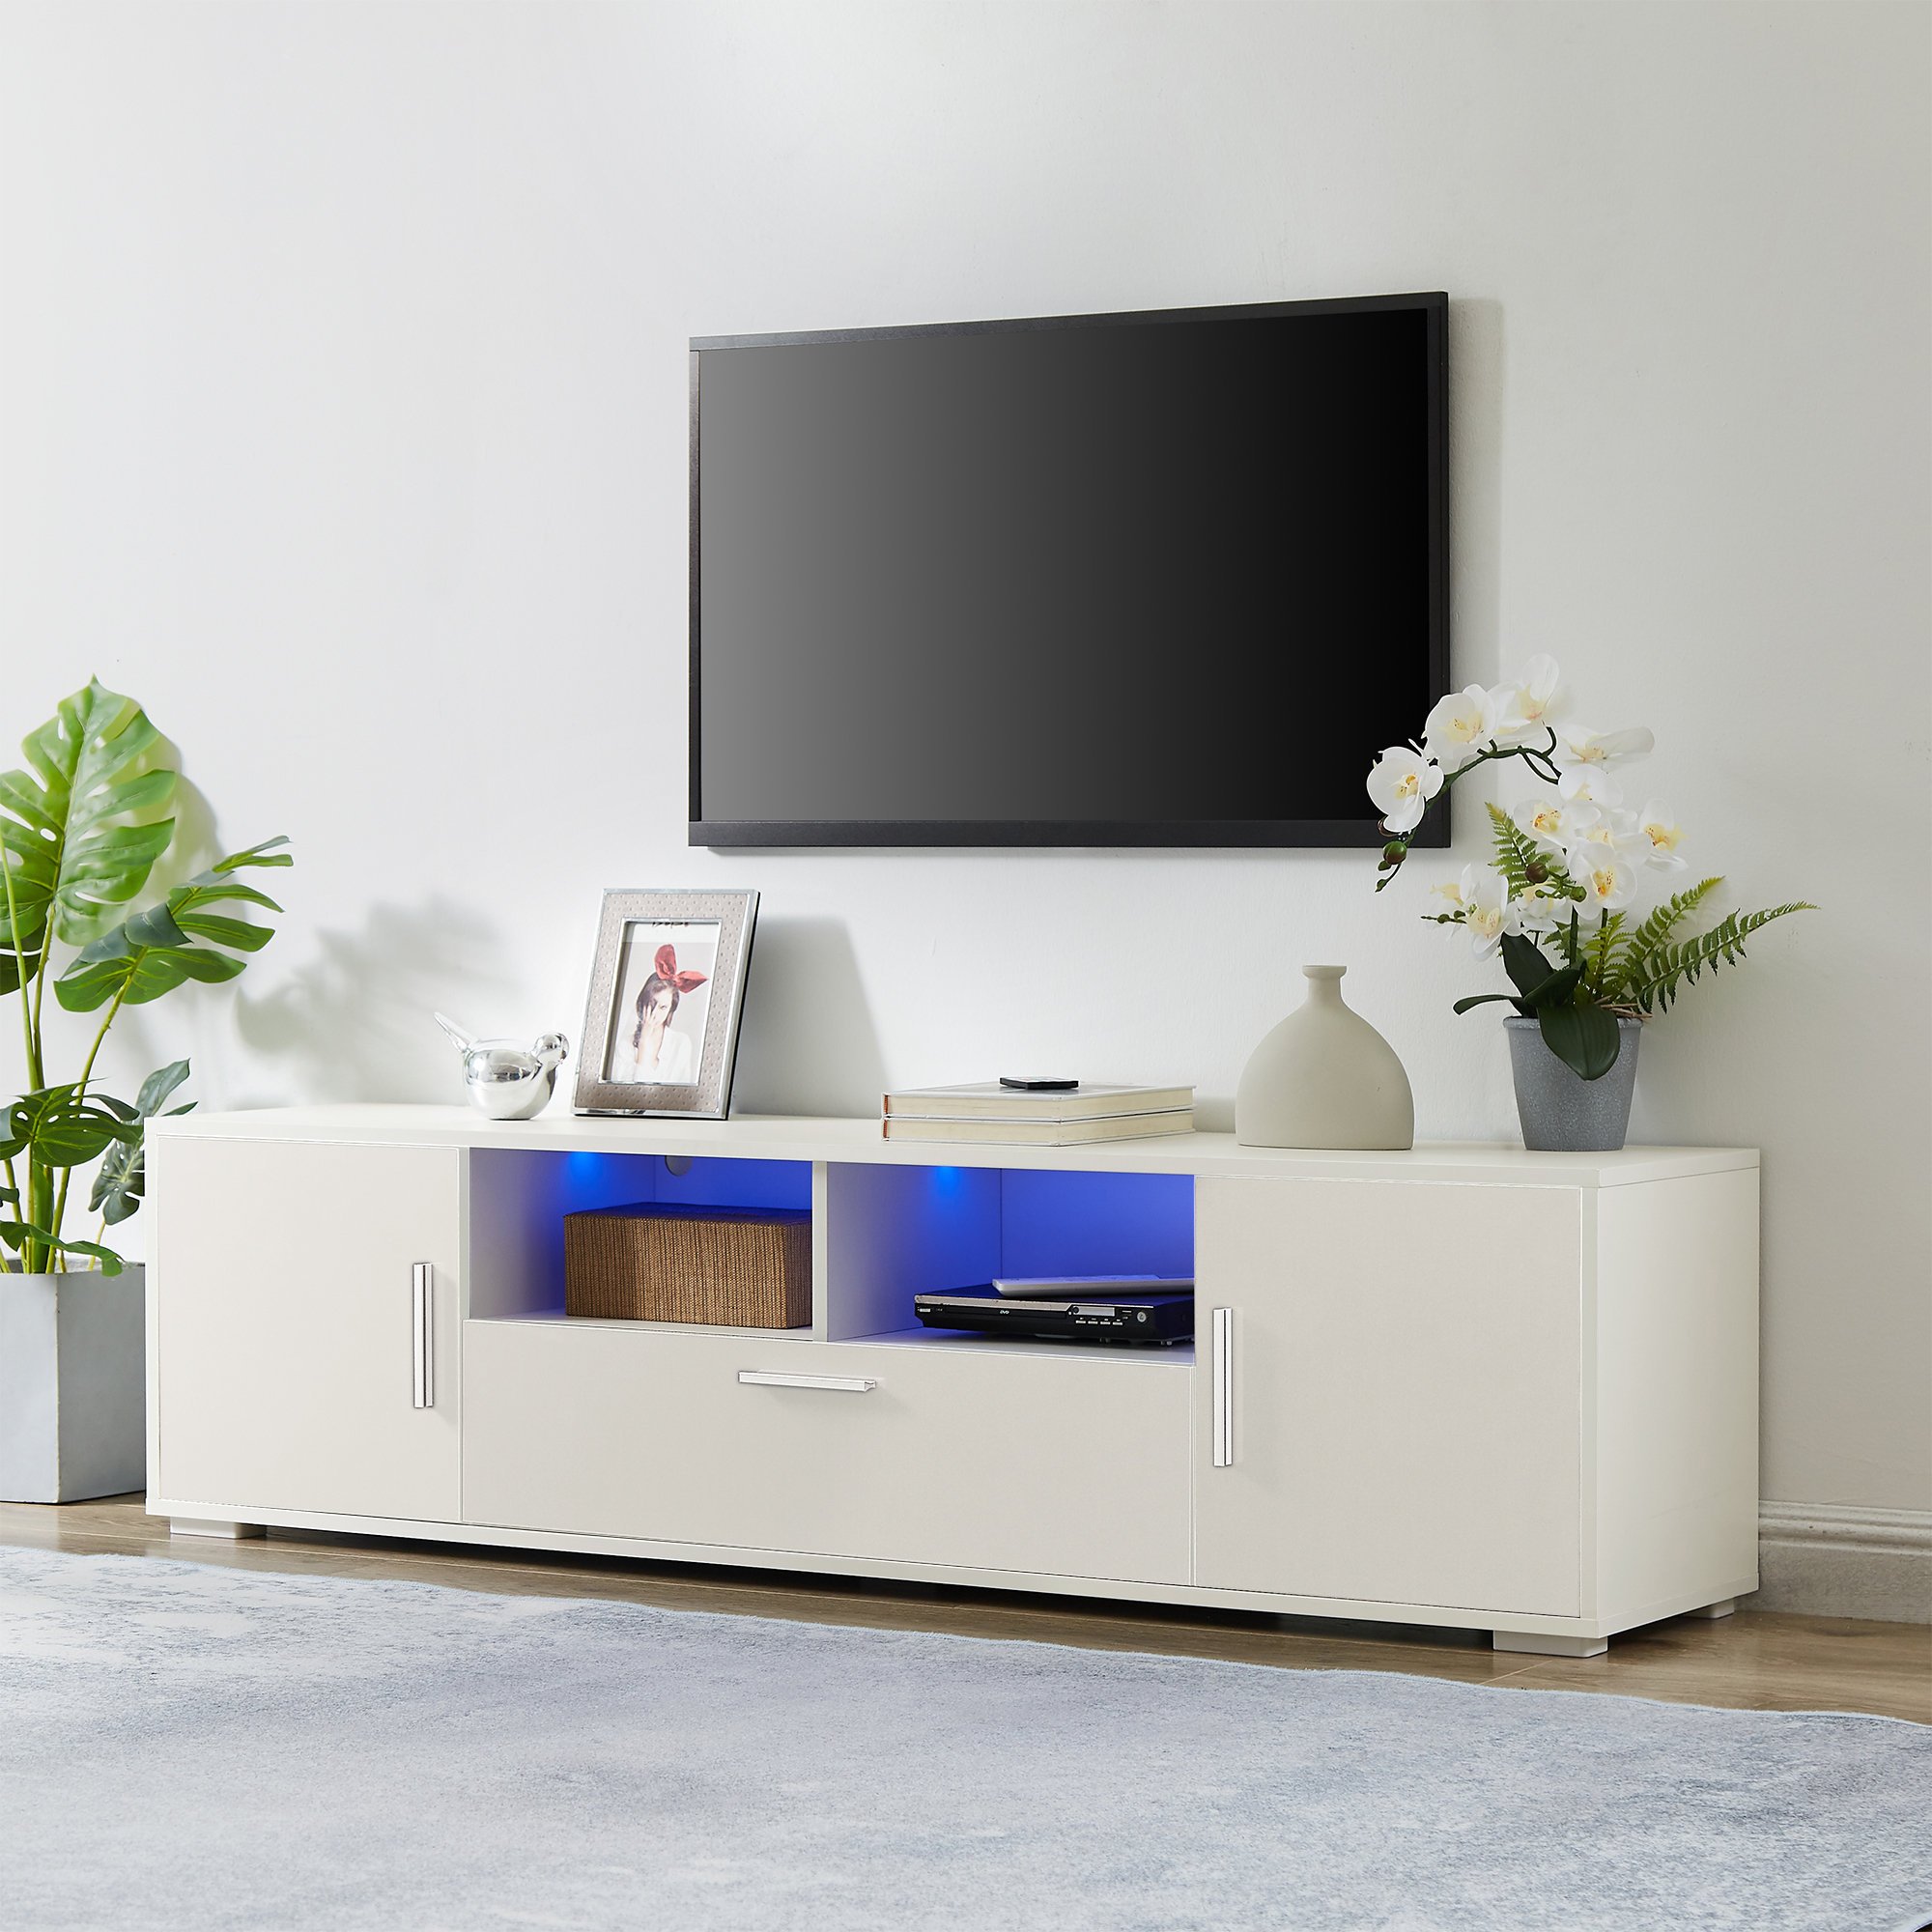 QUICK ASSEMBLE WHITE morden TV Stand,only 20 minutes to finish assemble, with LED Lights,high glossy front TV Cabinet,can be assembled in Lounge Room, Living Room or Bedroom,color:WHITE-Boyel Living